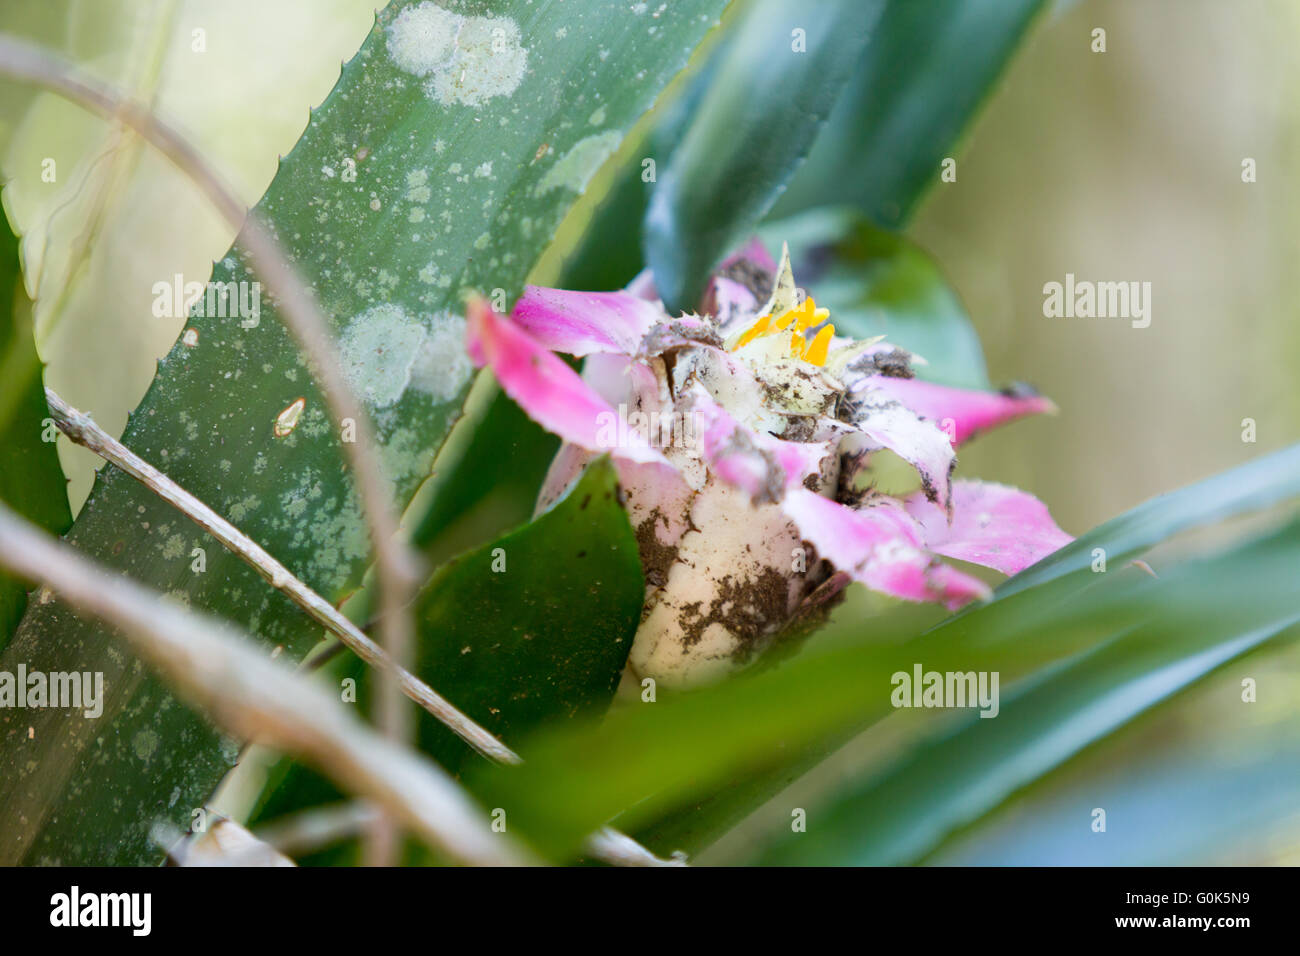 Sao Paulo, Brazil. 1st May, 2016. A bromeliad (Wittrochia cyathiformis) flower is seen during this sunny day in Cantareira State Park (Portuguese: Parque Estadual da Cantareira) in Sao Paulo, Brazil. Credit:  Andre M. Chang/ARDUOPRESS/Alamy Live News Stock Photo